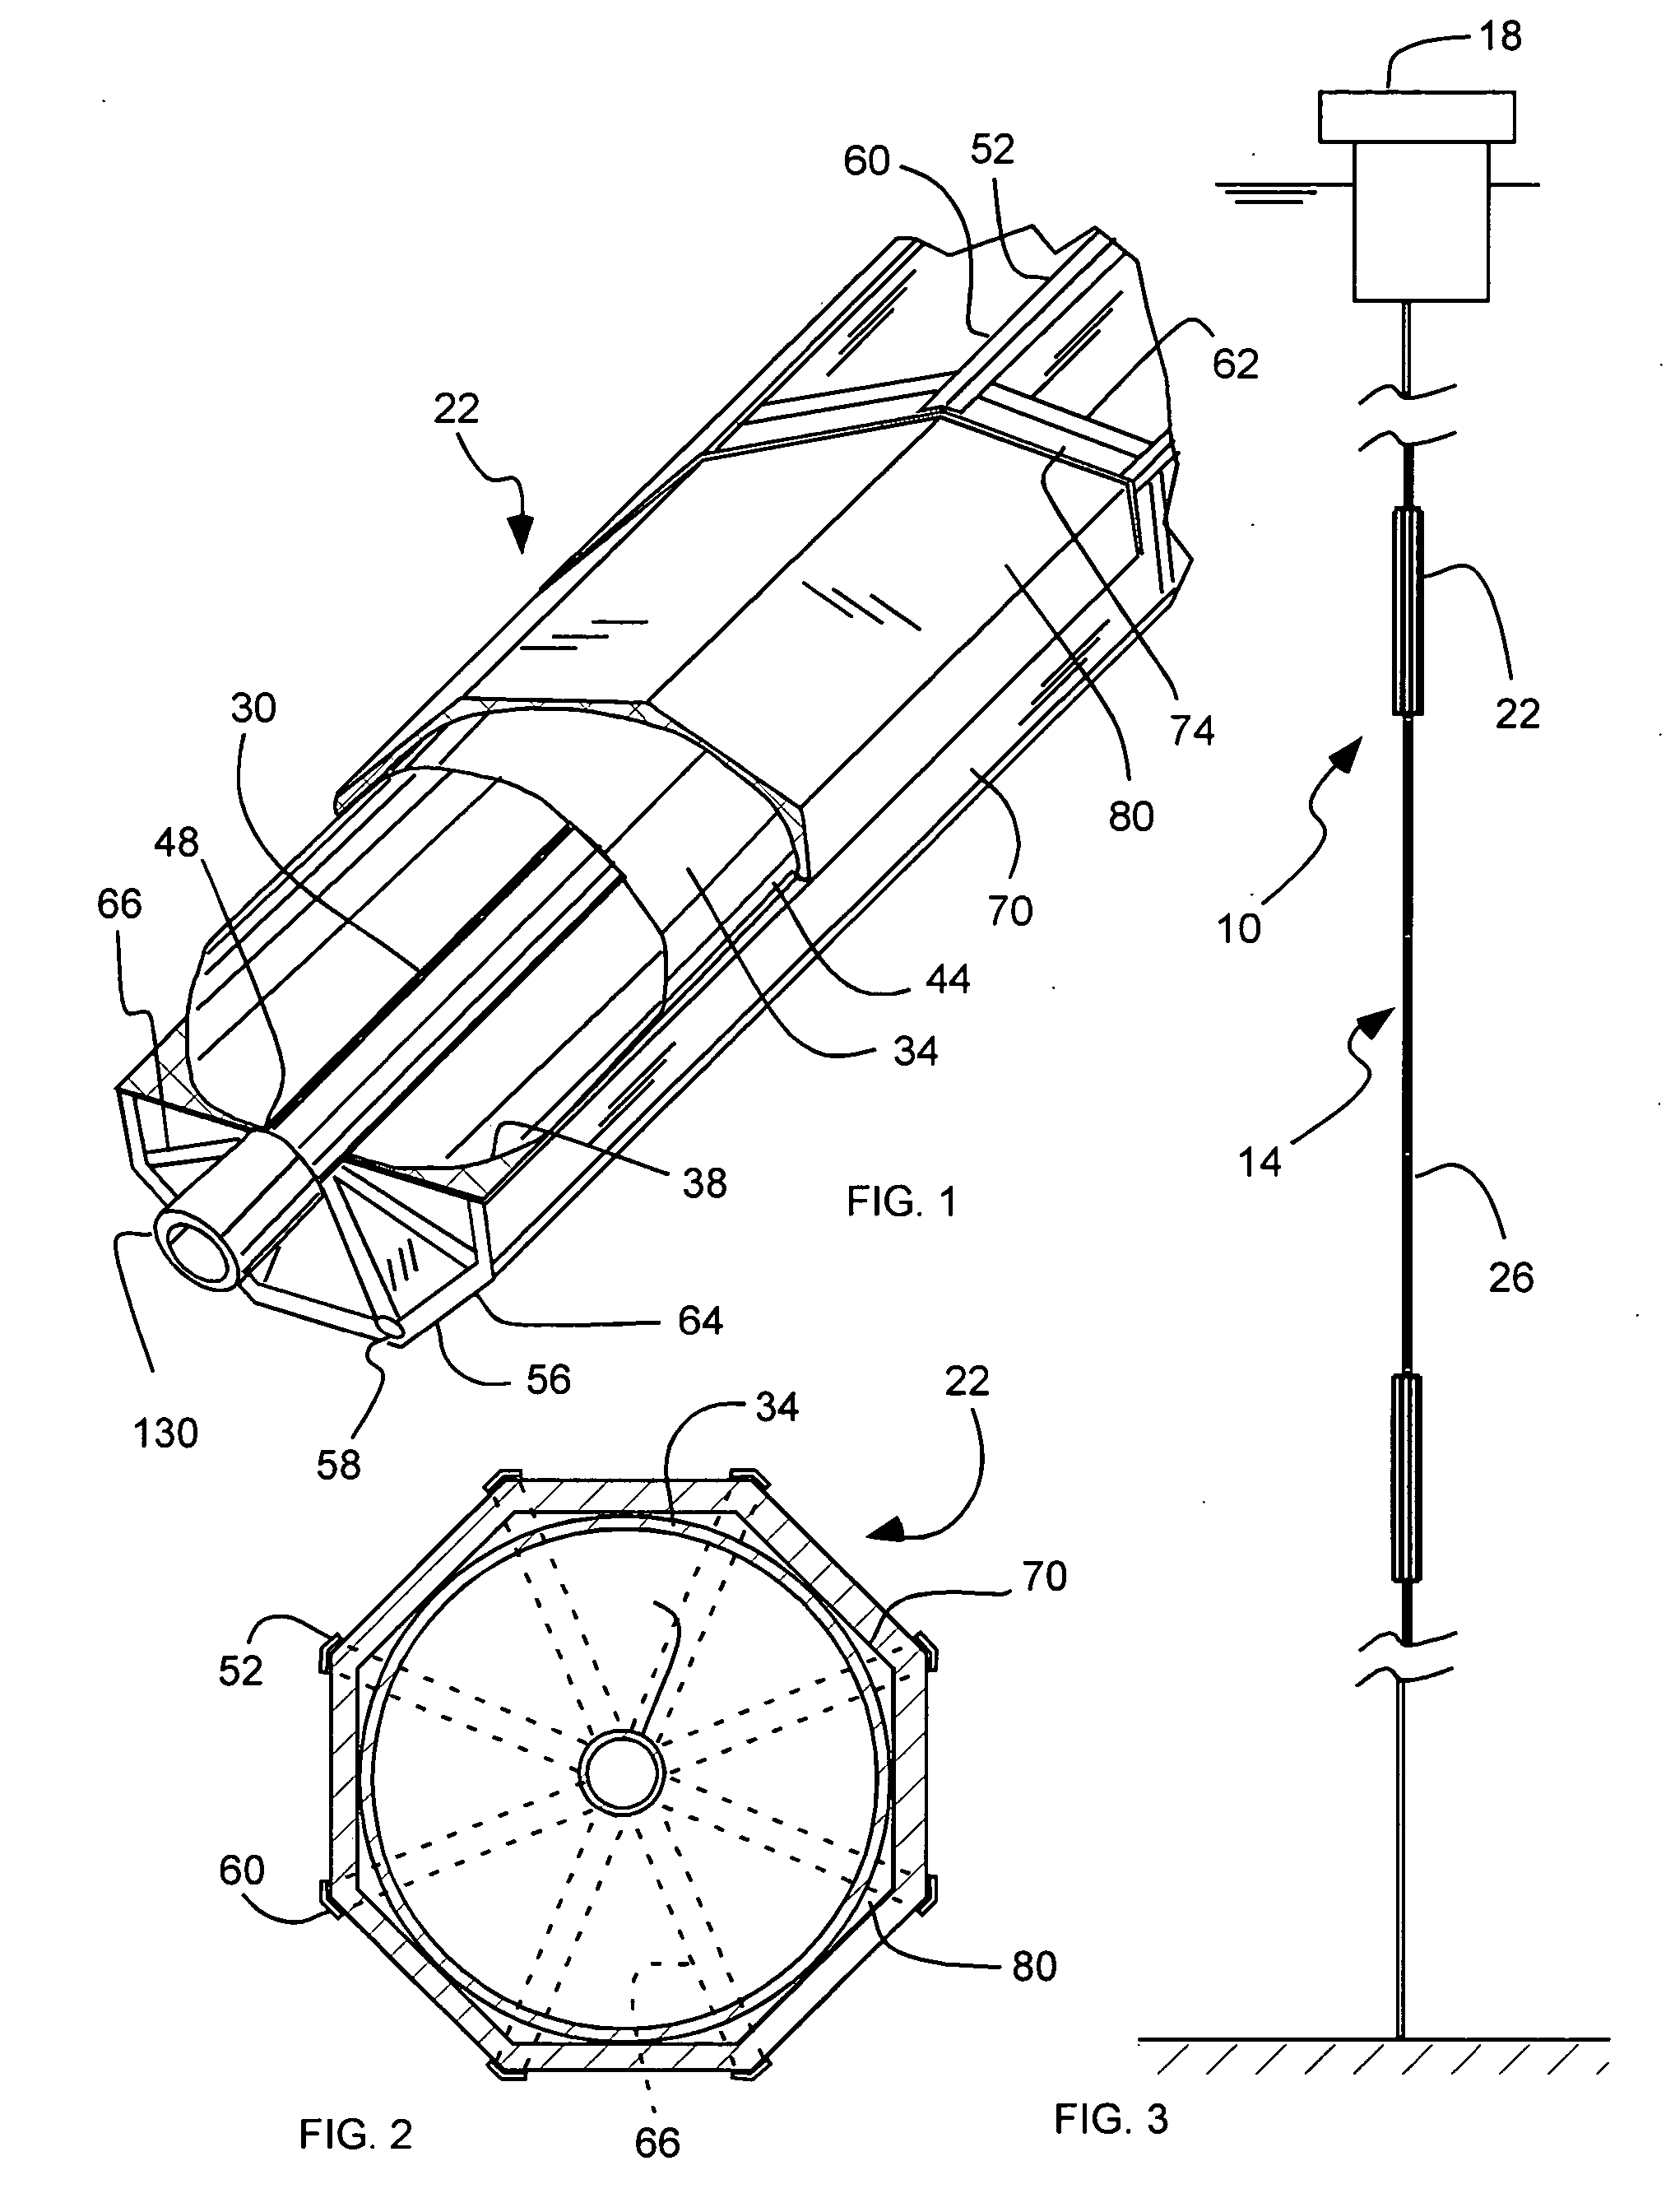 Integrated buoyancy joint